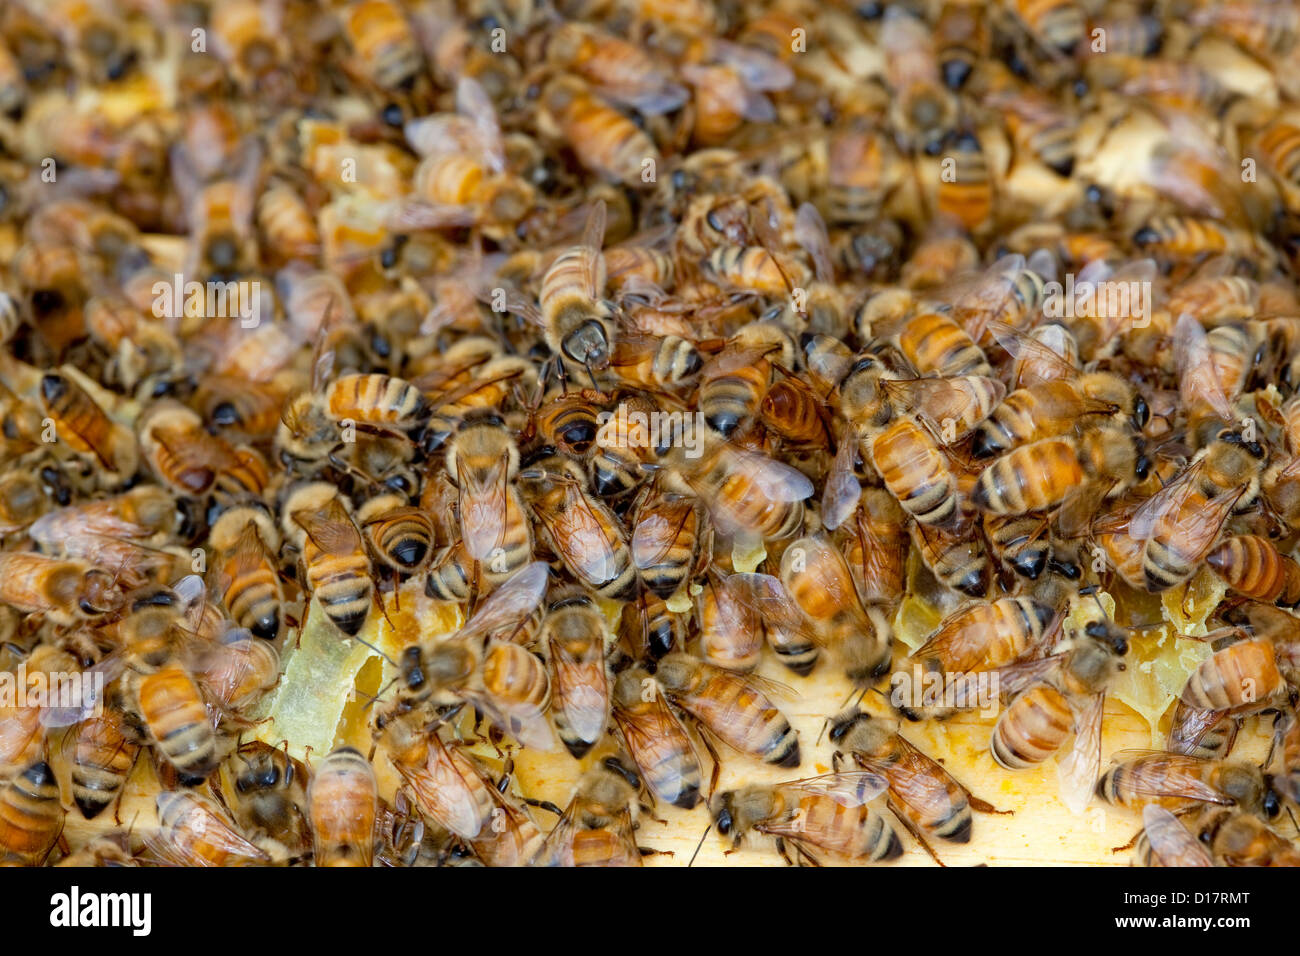 A colony of bees in a beehive. Stock Photo